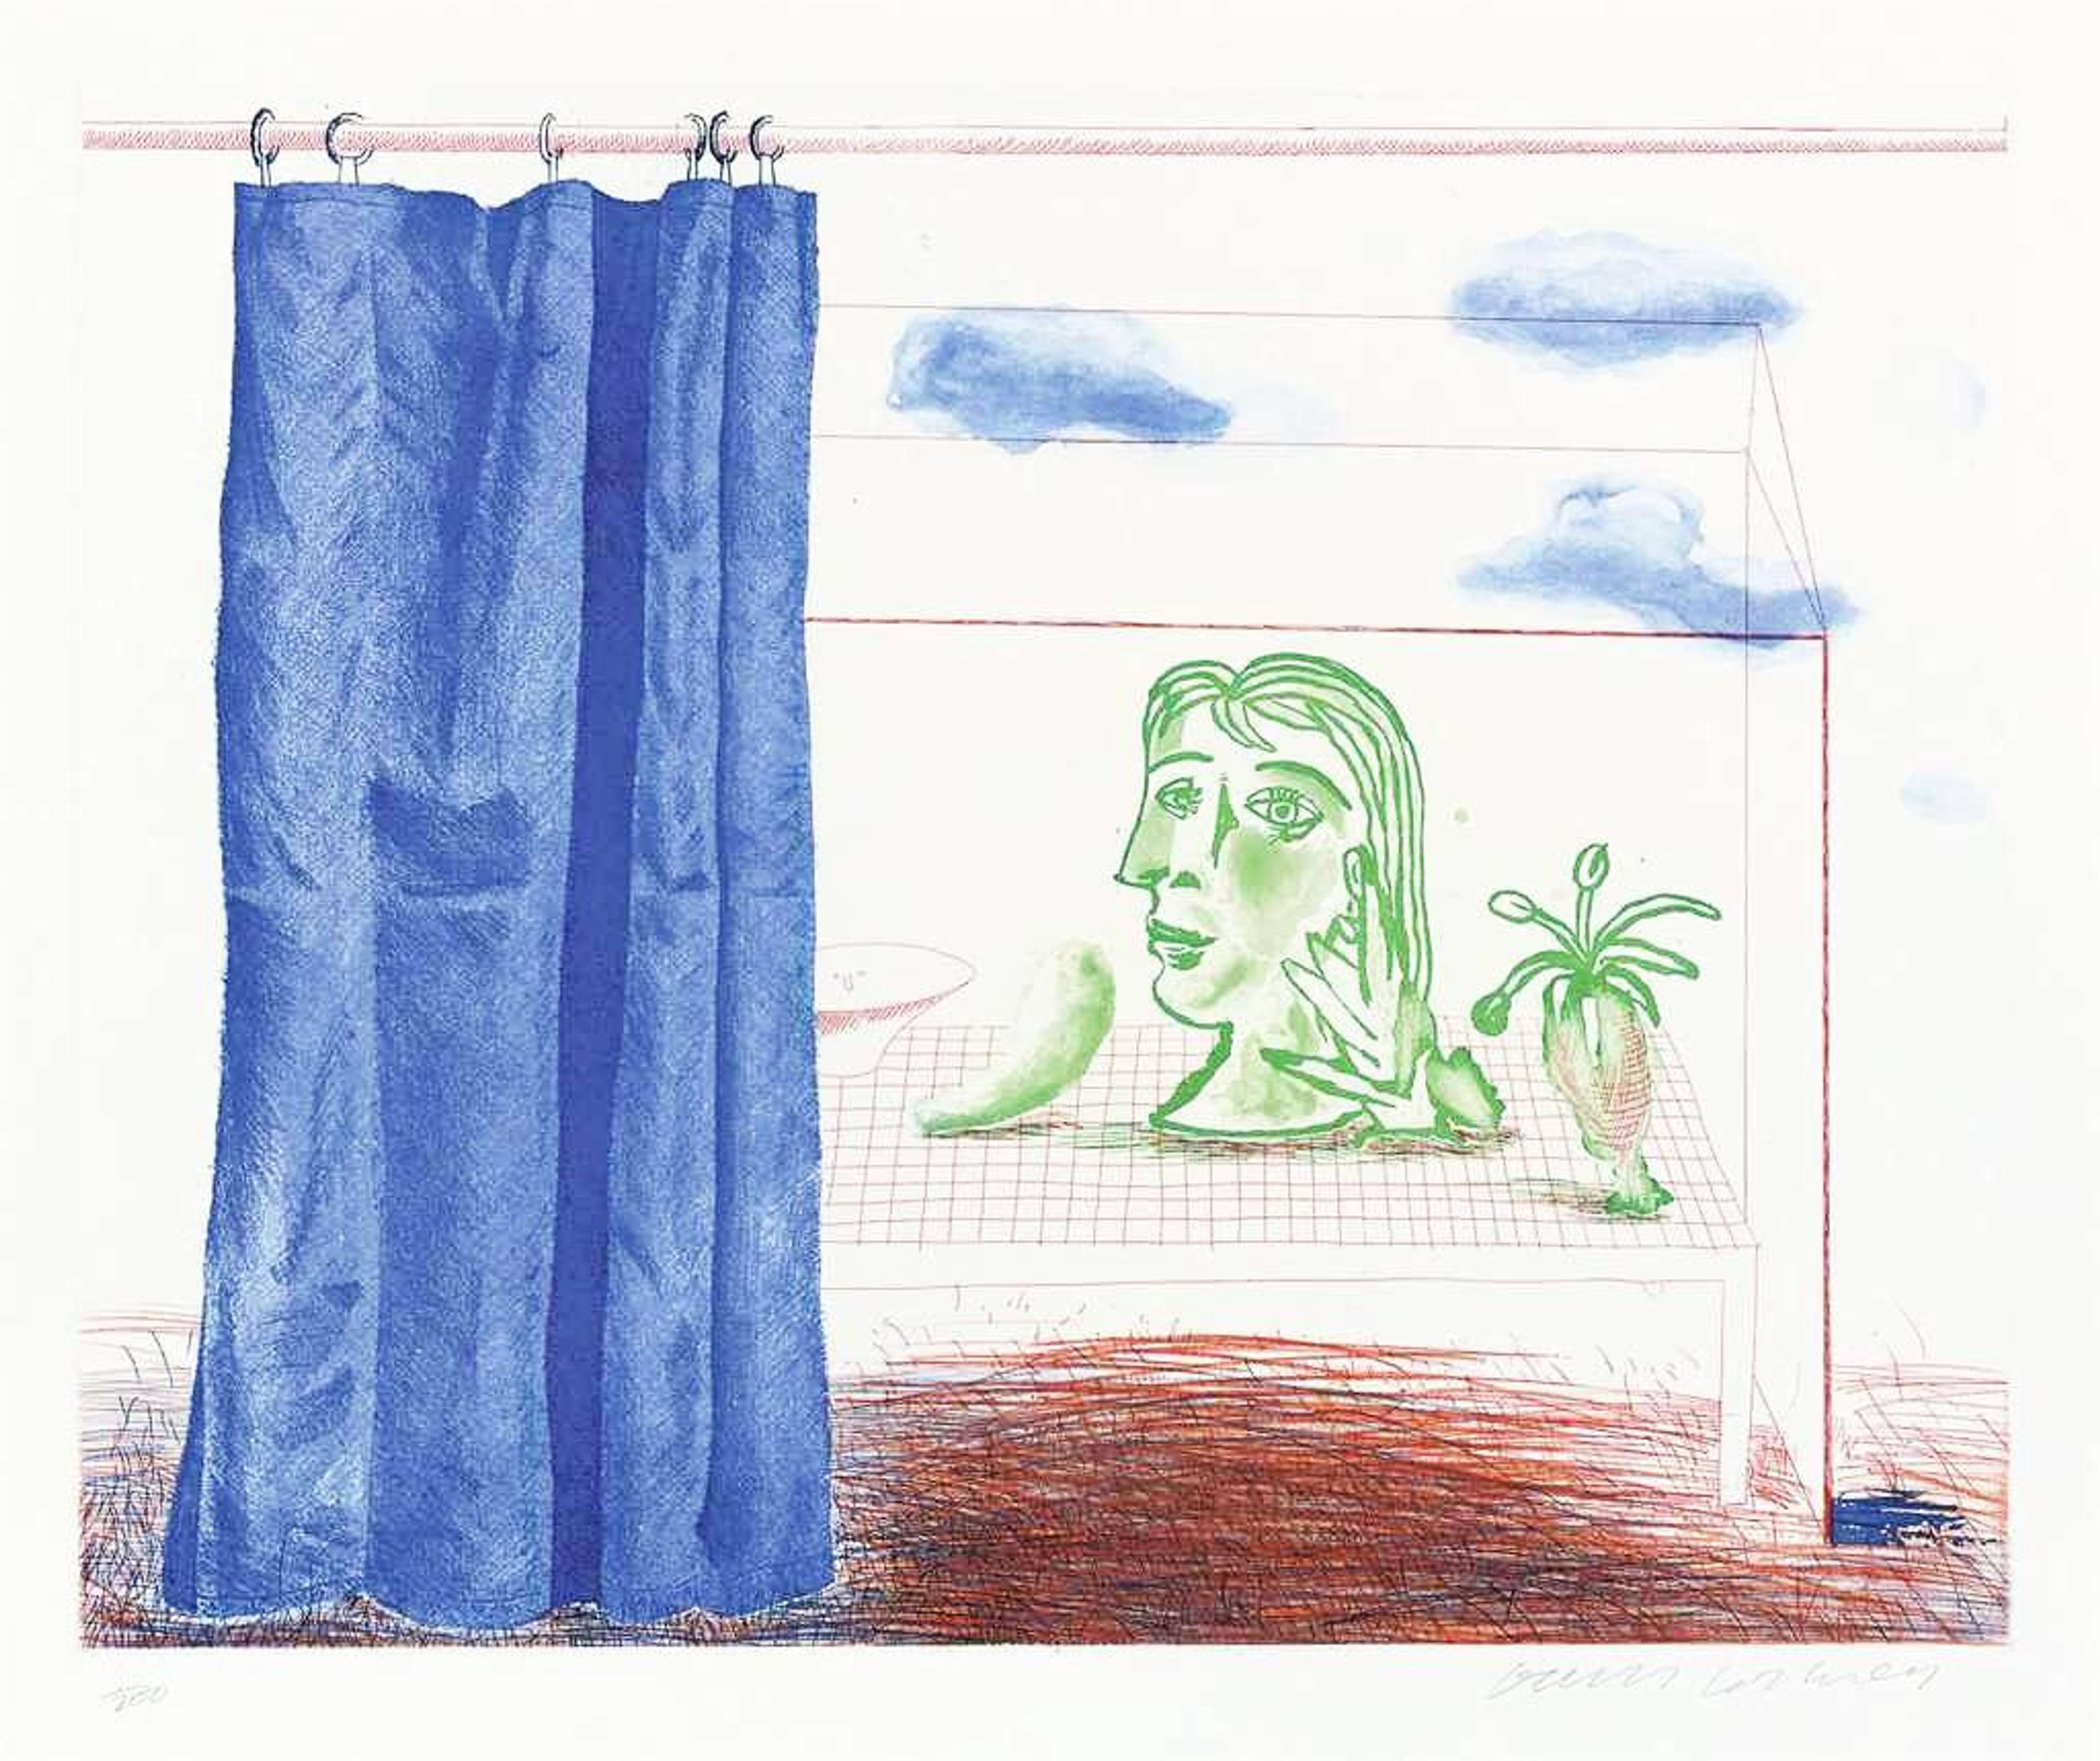 David Hockney’s What Is This Picasso. An intaglio print of a green, Cubist drawing of a woman’s head on a table behind a blue curtain.